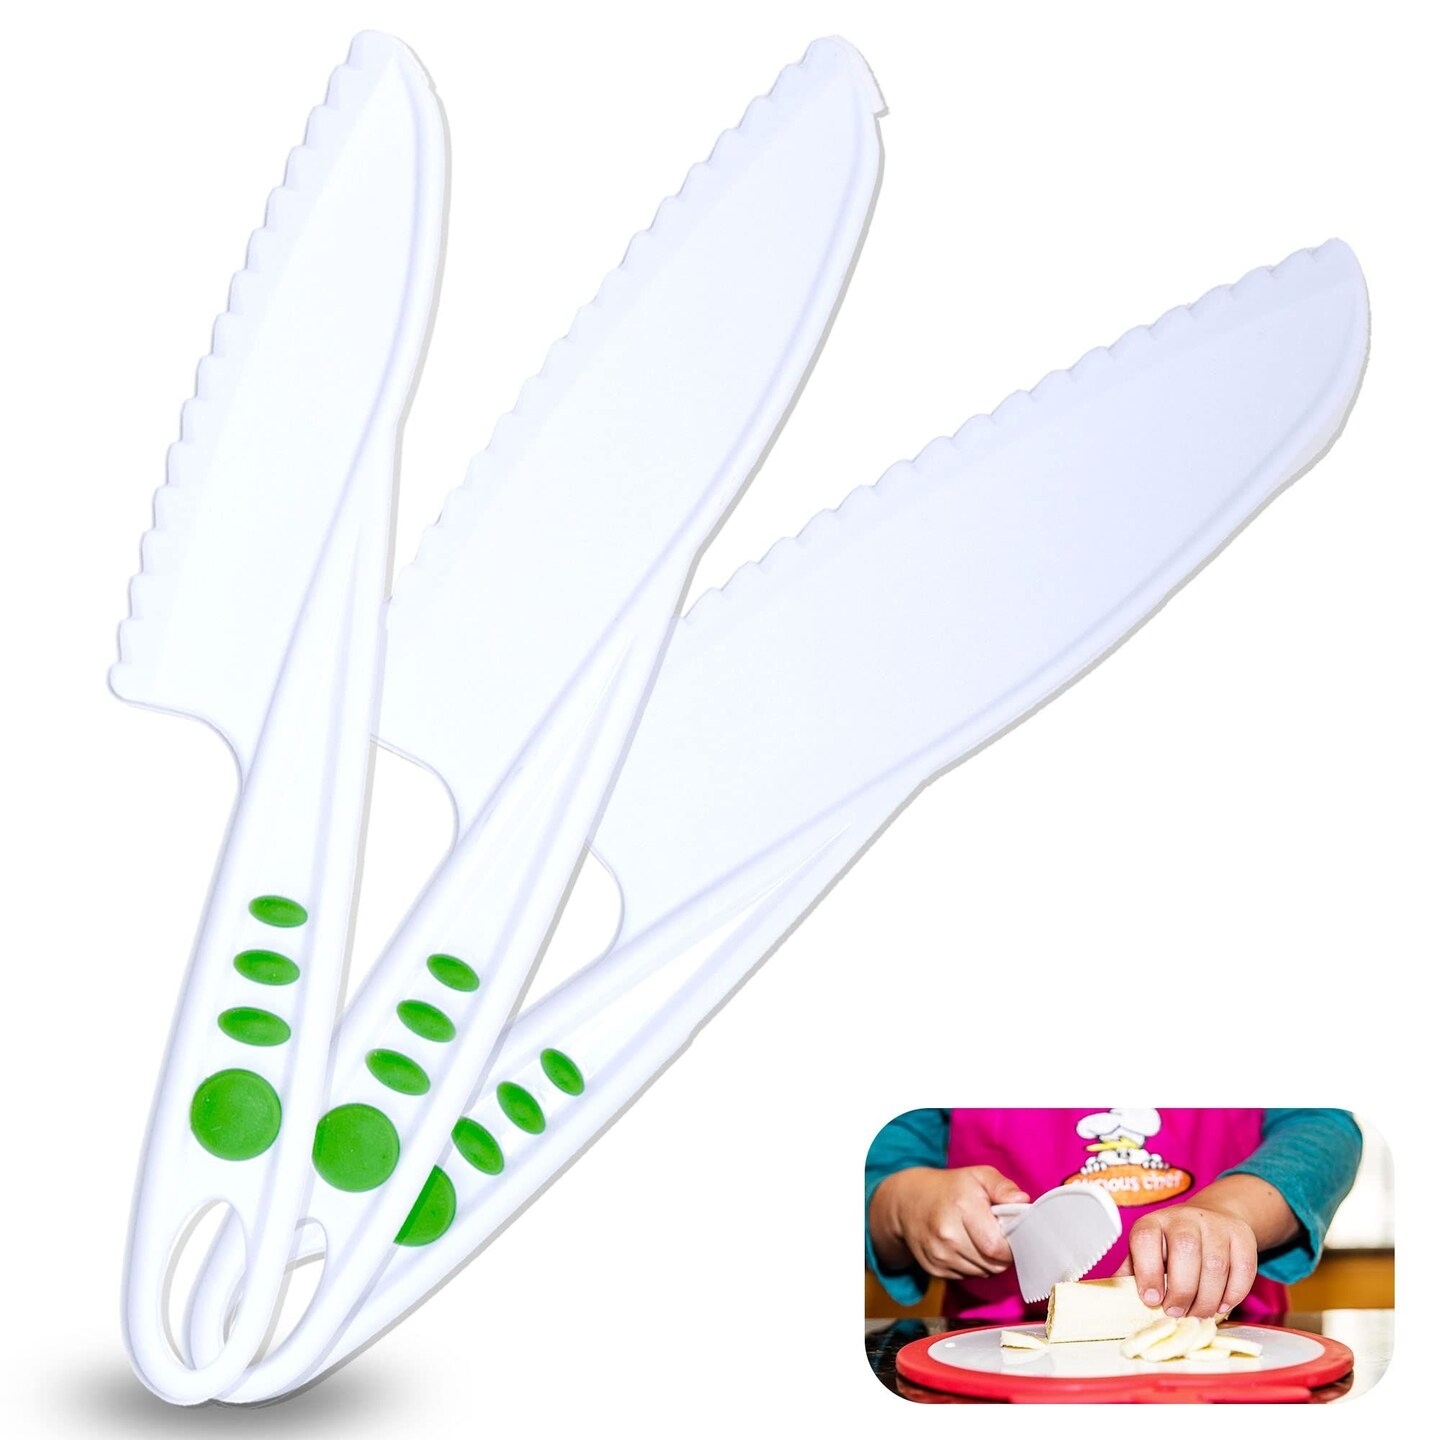 Curious Chef 3-Piece Nylon Knife Set for Kids, Dishwasher Safe Tools, Made with BPA-Free Plastic, Real Kitchen Kit